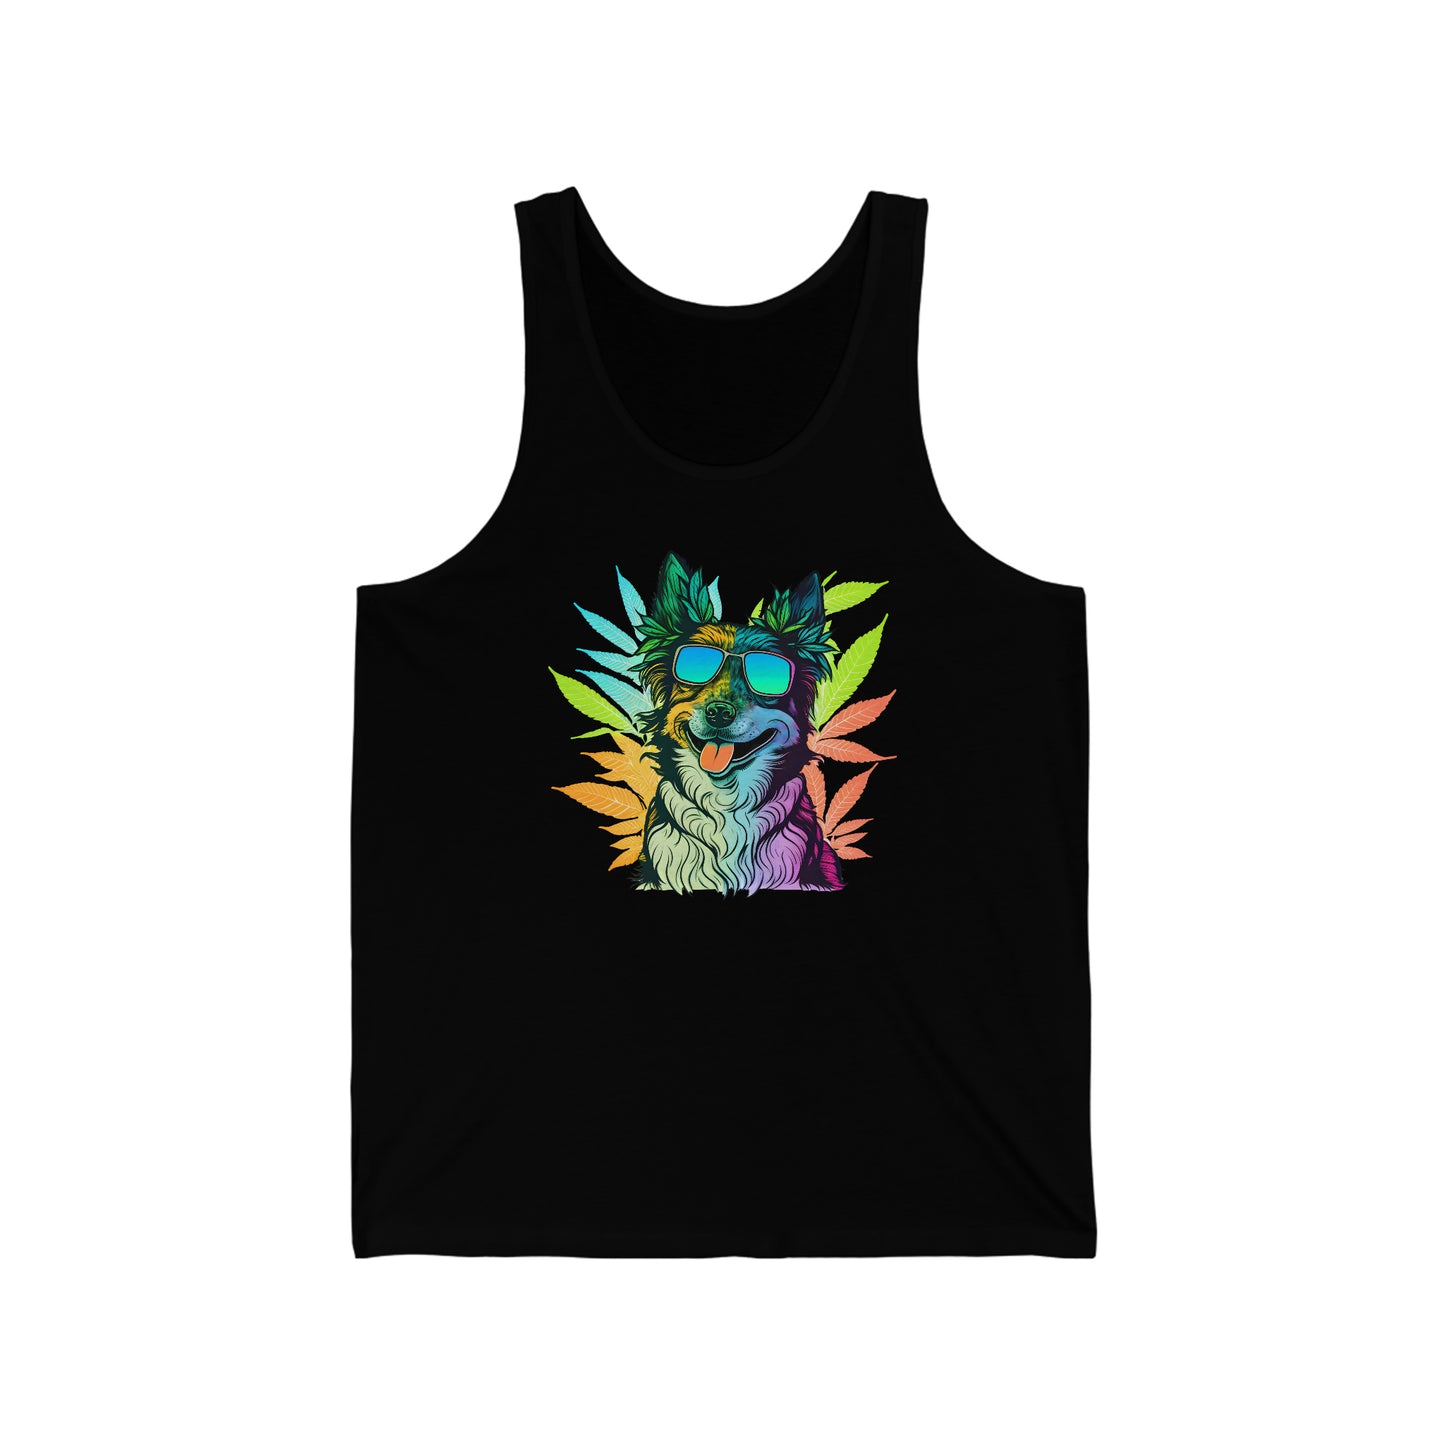 A Black cannabis jersey tank top with a border collie wearing shades and surrounded by weed leaves